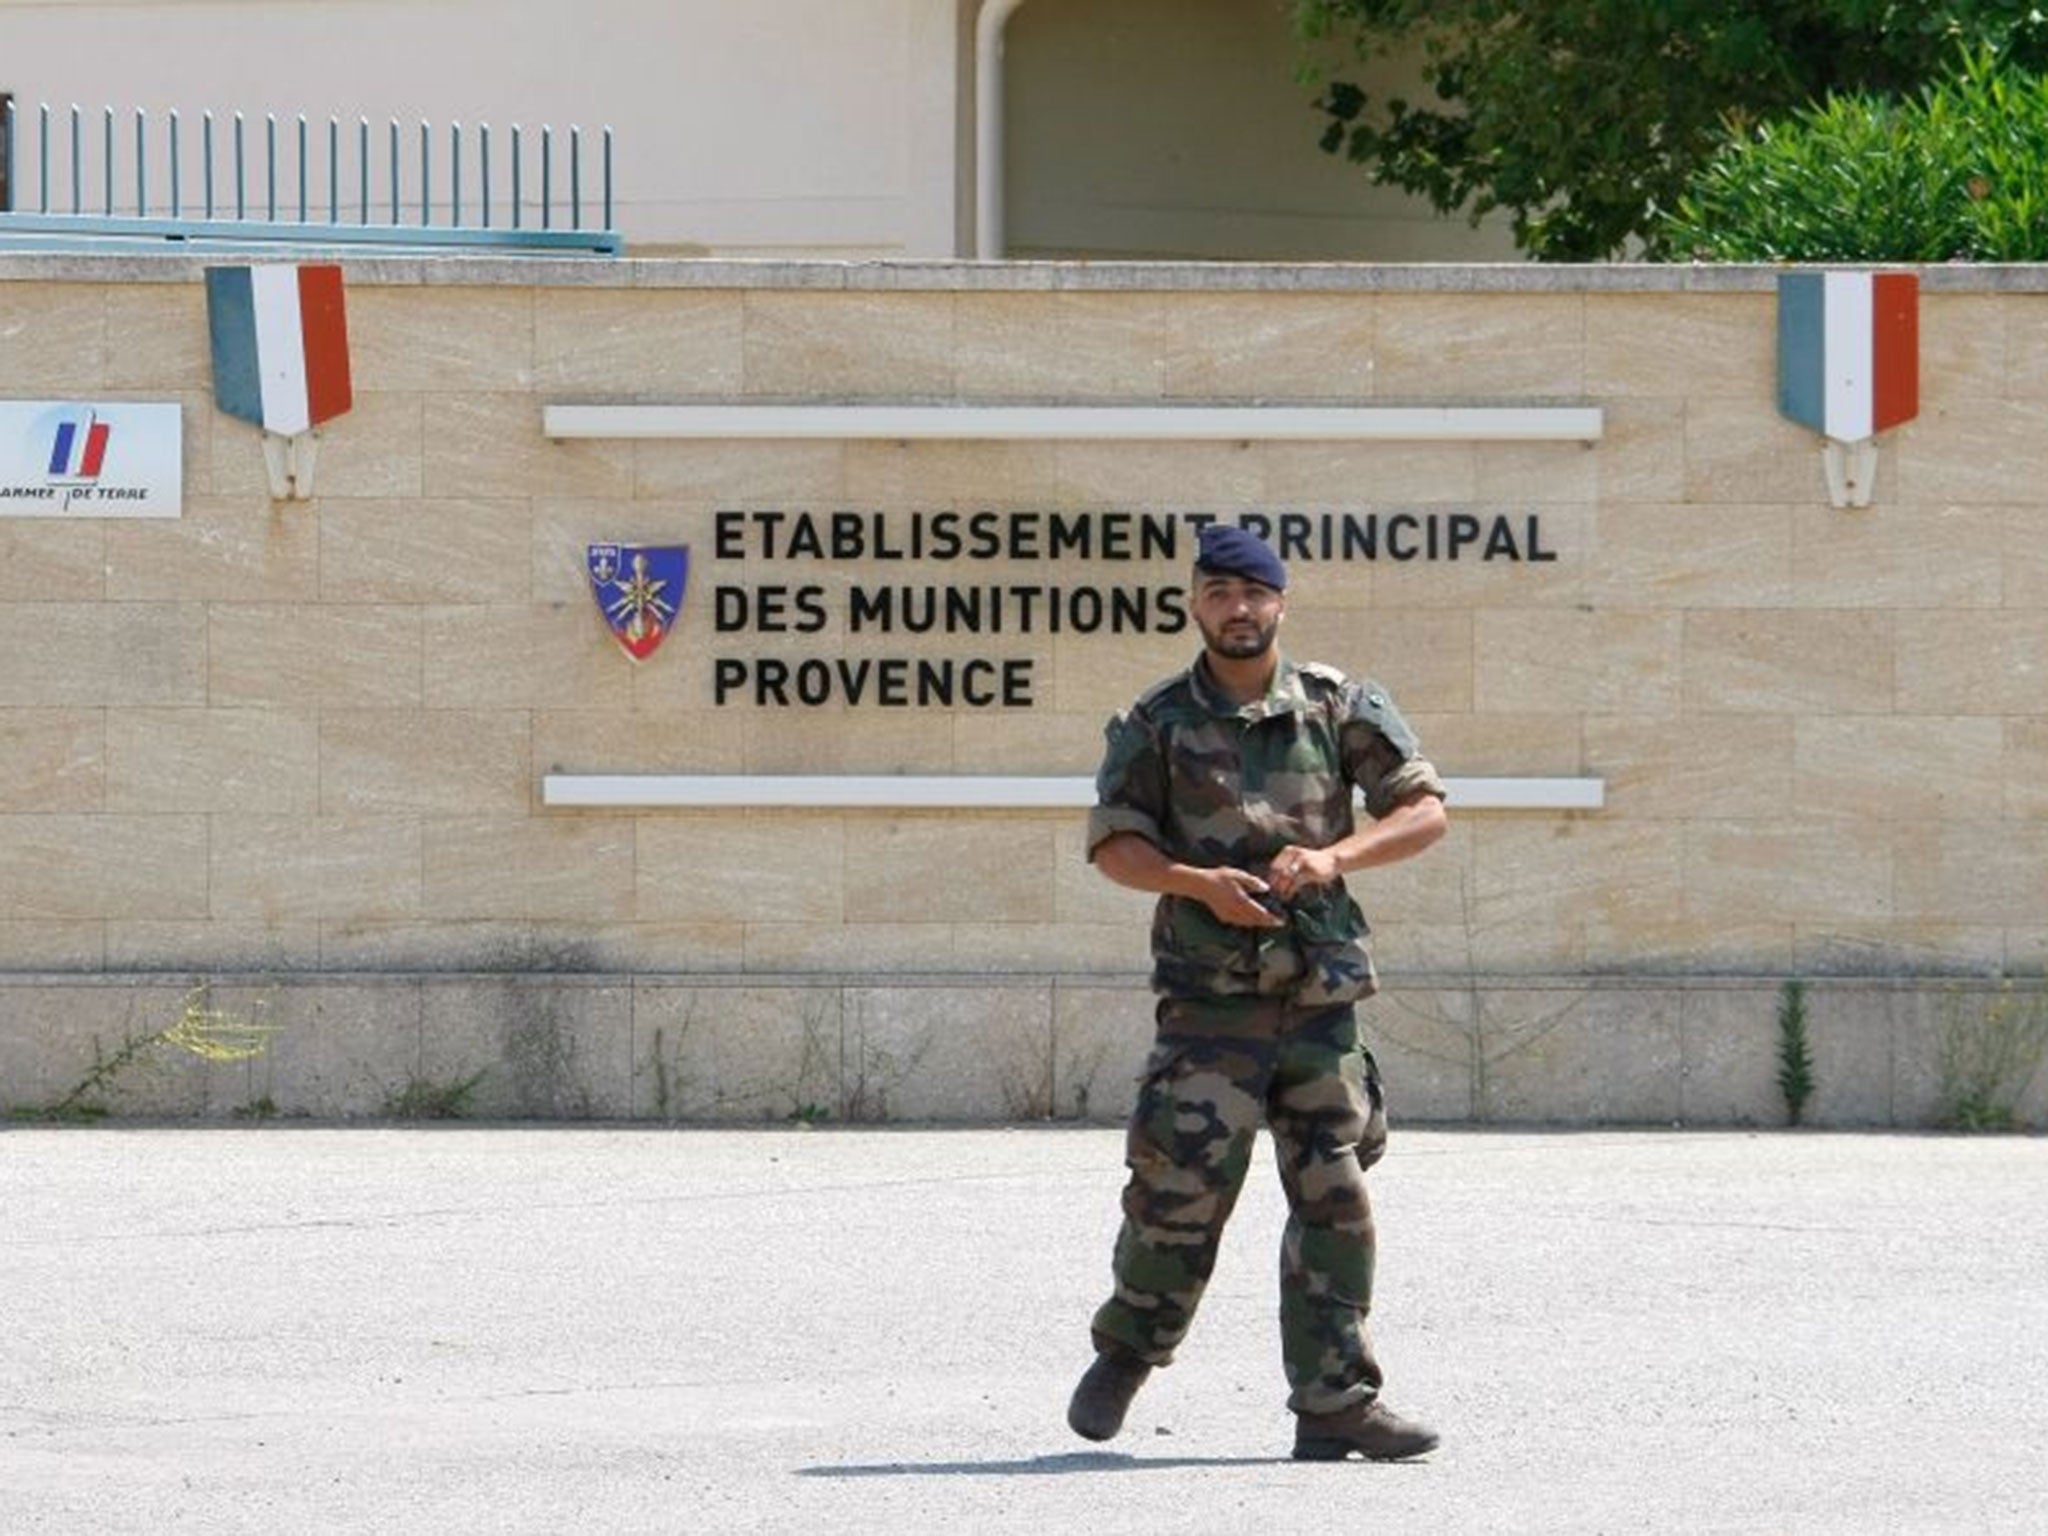 A soldier walks outside the weapons stocks military base in Miramas , southern France, Tuesday, July 7, 2015. French authorities are investigating the theft of roughly 200 detonators plus grenades and plastic explosives from the military site. The break